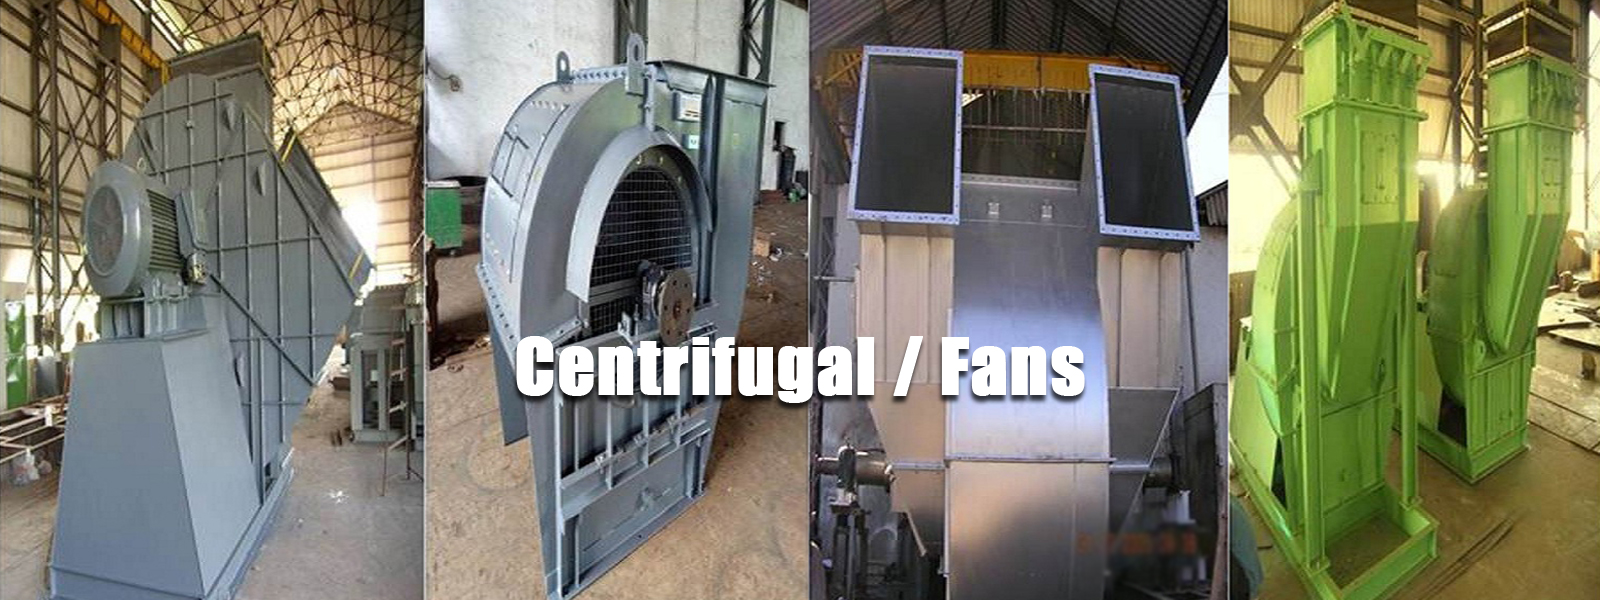 cyclone dust collector manufacturers, cyclone dust collector manufacturer in india, baghouse manufacturers, baghouse manufacturers india, multiclone dust collector, multiclone dust collector manufacturers, multiclone dust collector manufacturers in india, reverse air baghouse manufacturers, scrubber manufacturers in india, venturi scrubber manufacturers, industrial fan manufacturers, industrial fan manufacturers in india, axial fan manufacturers, axial fans manufacturers in india, id fan manufacturers, id fan manufacturers in india,centrifugal fan manufacturers, centrifugal fan manufacturers in india, industrial blower manufacturers, industrial blower manufacturers in india, tube axial fan manufacturers, tube axial fans manufacturers india, dust collection system manufacturers, dust collector system manufacturer india, dust collector system, fume extraction system, fume extraction system manufacturers ,pyrolysis plant manufacturers in india, pyrolysis plant, rotary dryer manufacturers, incinerator manufacturer in india, industrial waste incinerator manufacturers, force draft cooler,recuperator manufacturer in india, ladle manufacturers in india, aluminium extrusion plant manufacturers in india, turnkey projects companies in india, hot air generator manufacturers in india, plate bending machine manufacturers in india, Rotary kiln manufacturers, furnace manufacturers in india, calciner manufacturers, bag filter manufacturers in india, bag filter manufacturers, cartridge filter manufacturers in india, cyclone dust collector,Battery Cutting Machine, battery cutting machine manufacturers, battery cutting machine manufacturers in india,Battery Recycling Plant, battery recycling plant in india, battery recycling plant manufacturers,Battery Recycling Technology ,battery recycling technology india, lead acid battery recycling companies in india,Disposal technology for Lead Acid Battery Waste,disposal technology for lead acid battery waste india.